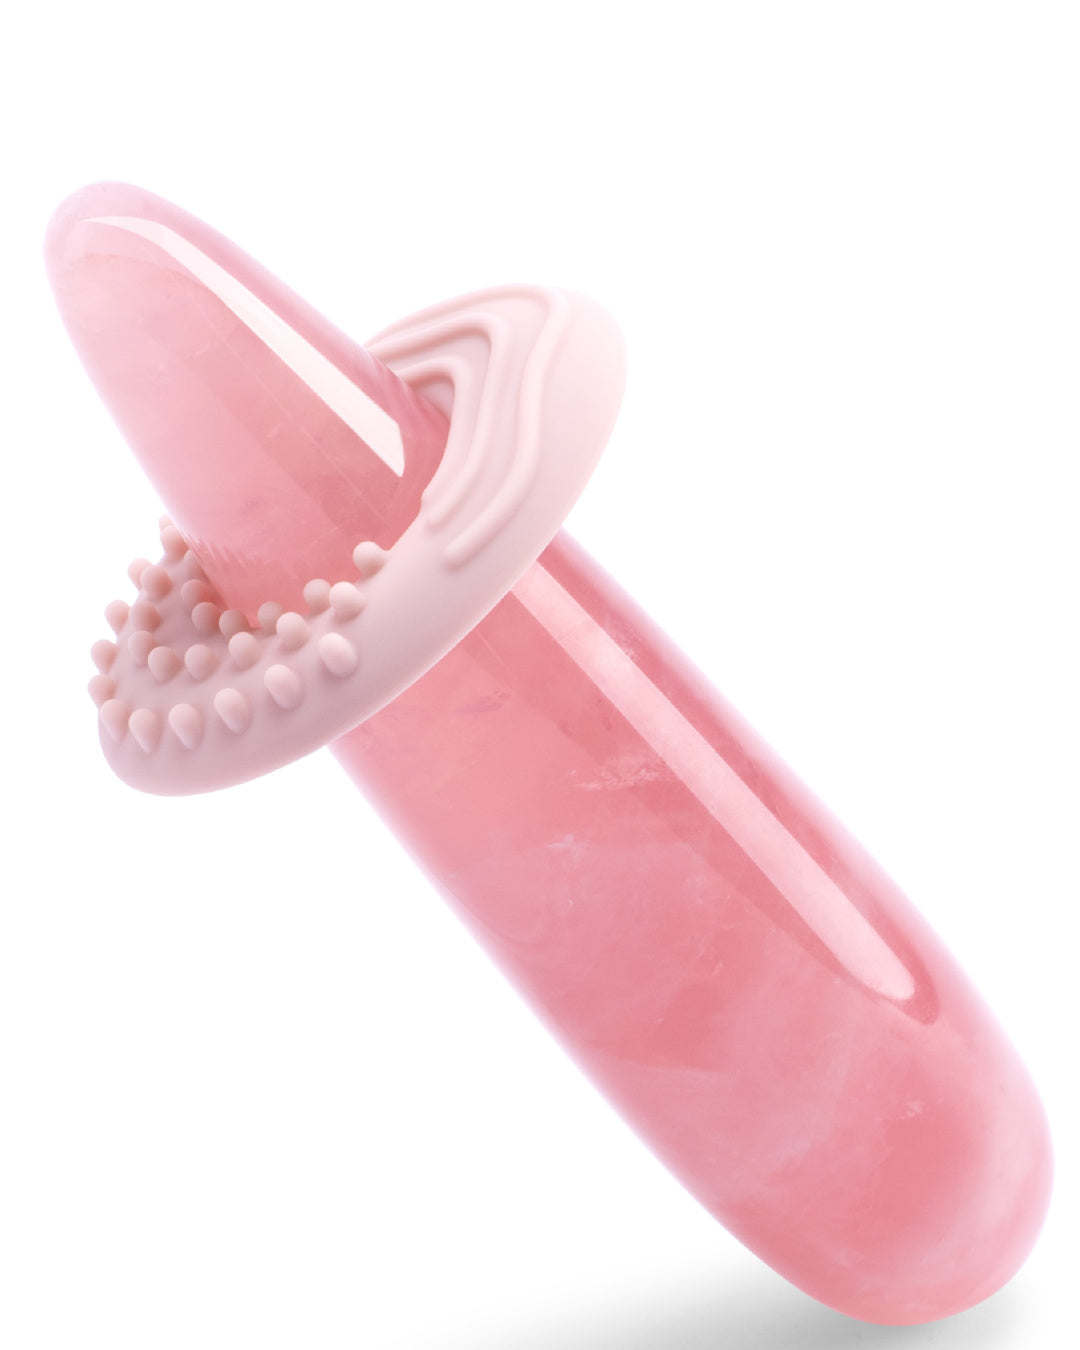 Le Wand Crystal  Wand - Rose Quartz on an angle with silicone ring around it 